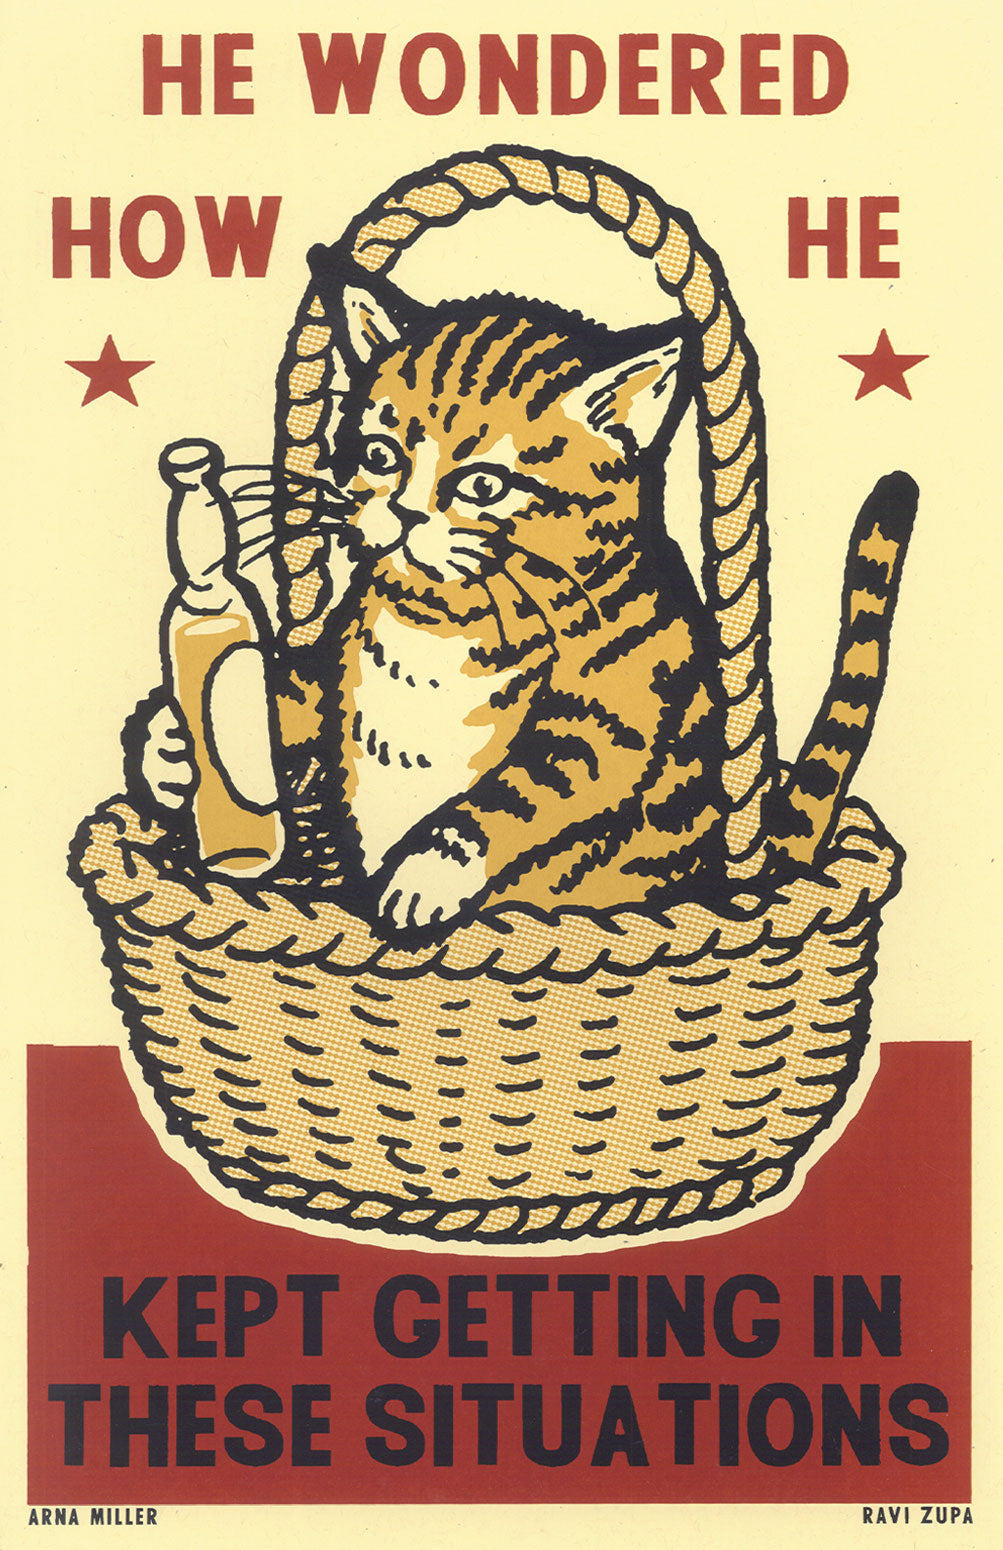 Drunk Cat Series Print - He Wondered How He Kept Getting in These Situations - By Arna Miller and Ravi Zupa